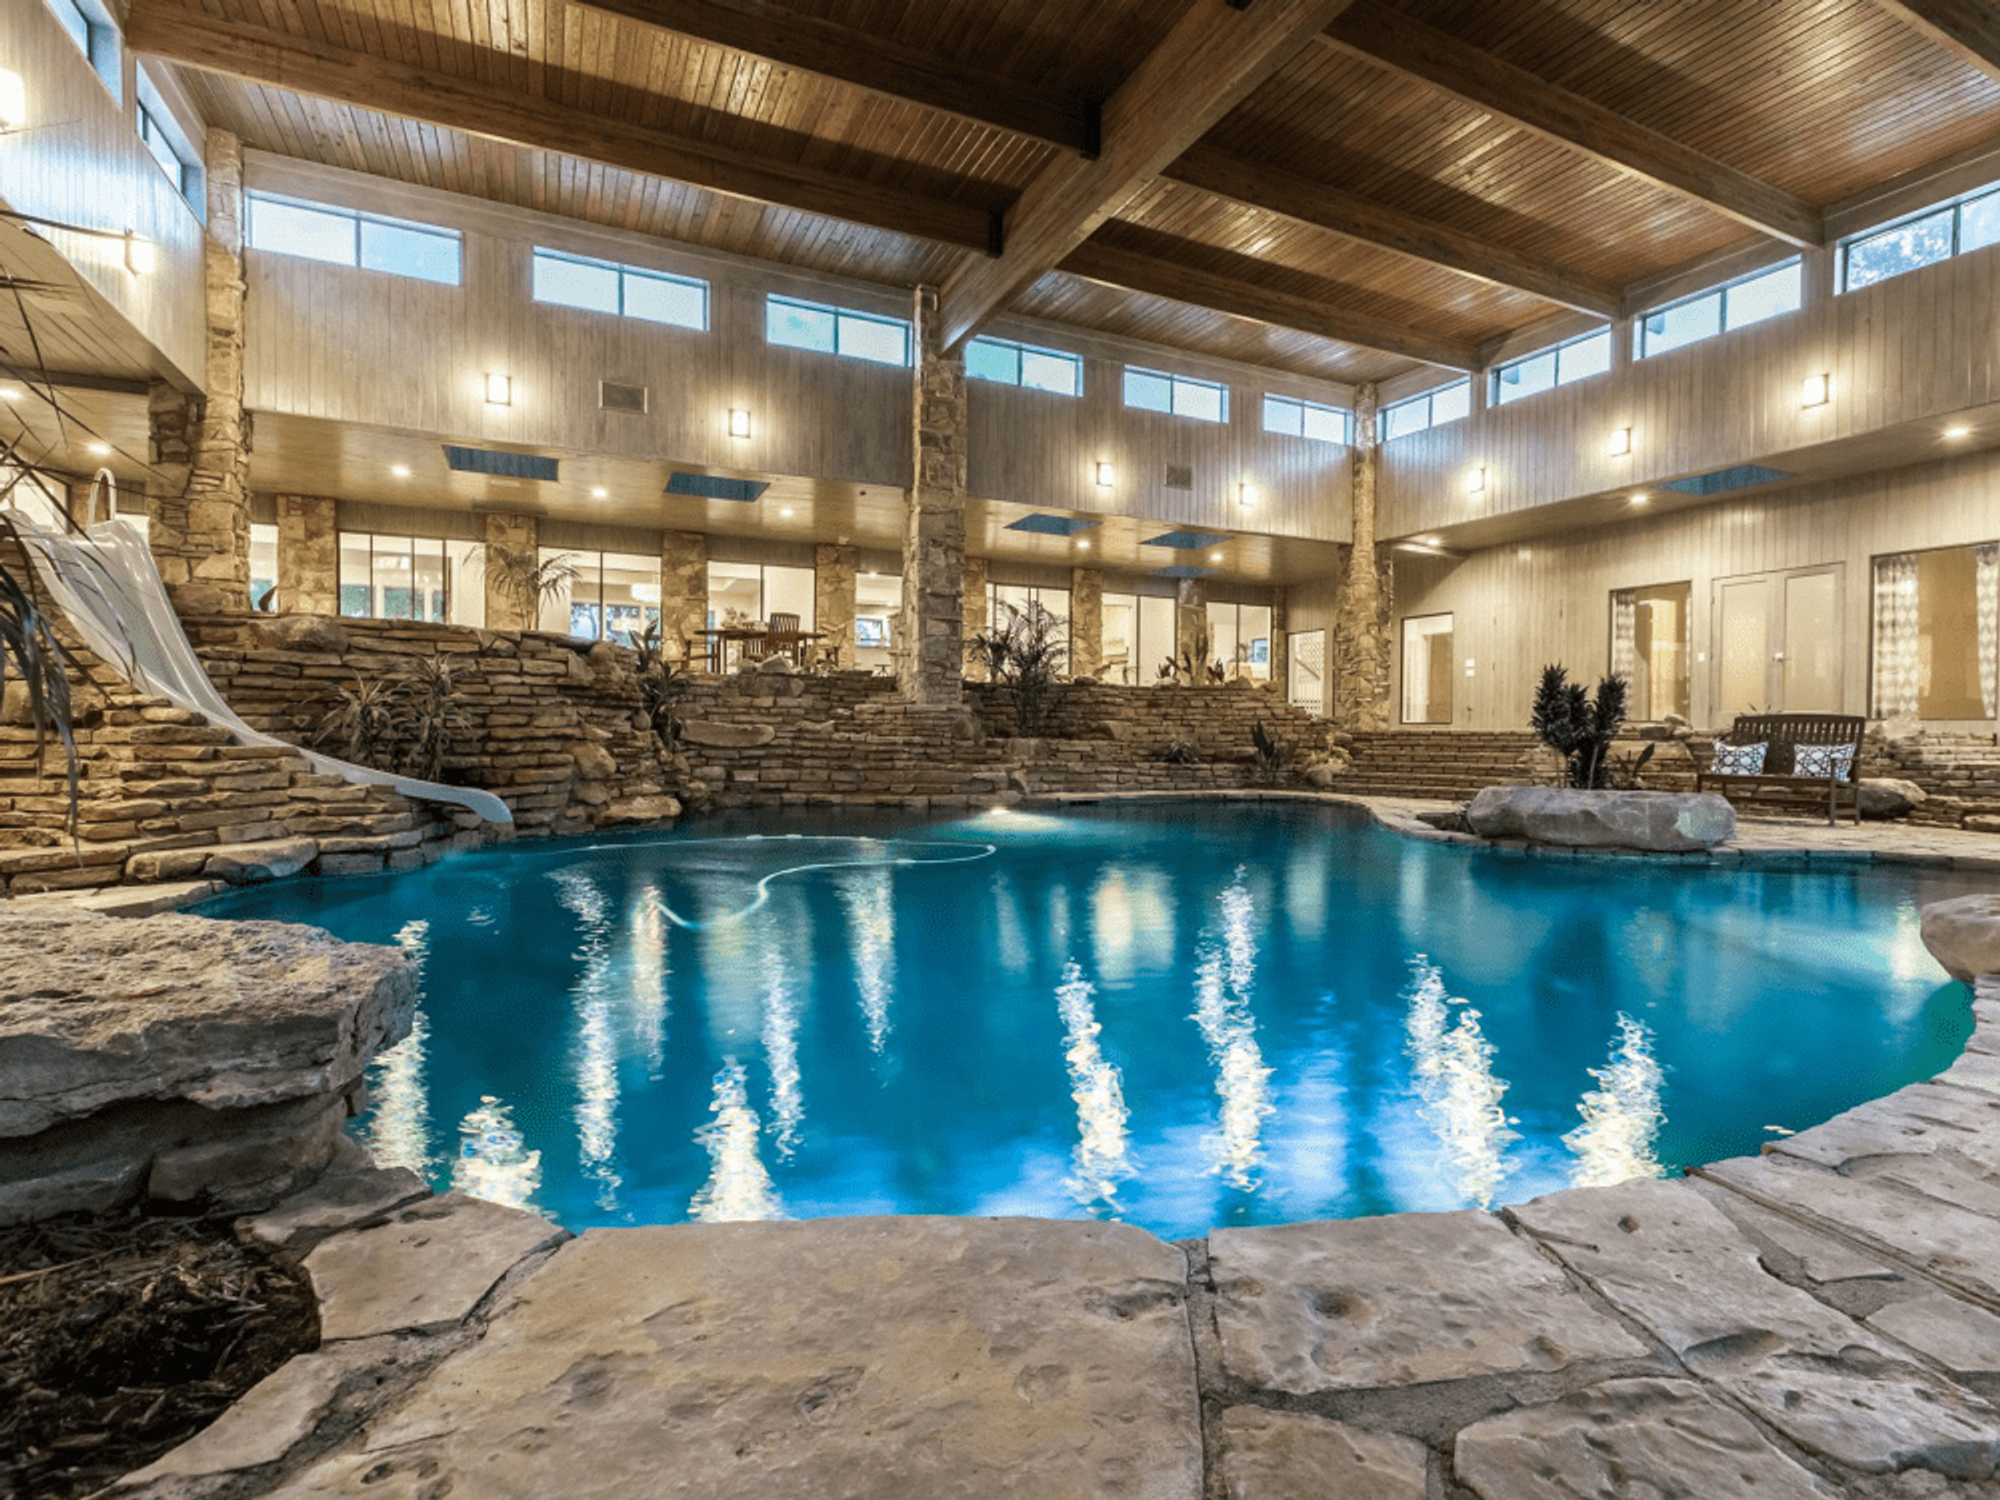 The massive home boasts an incredible indoor pool room.